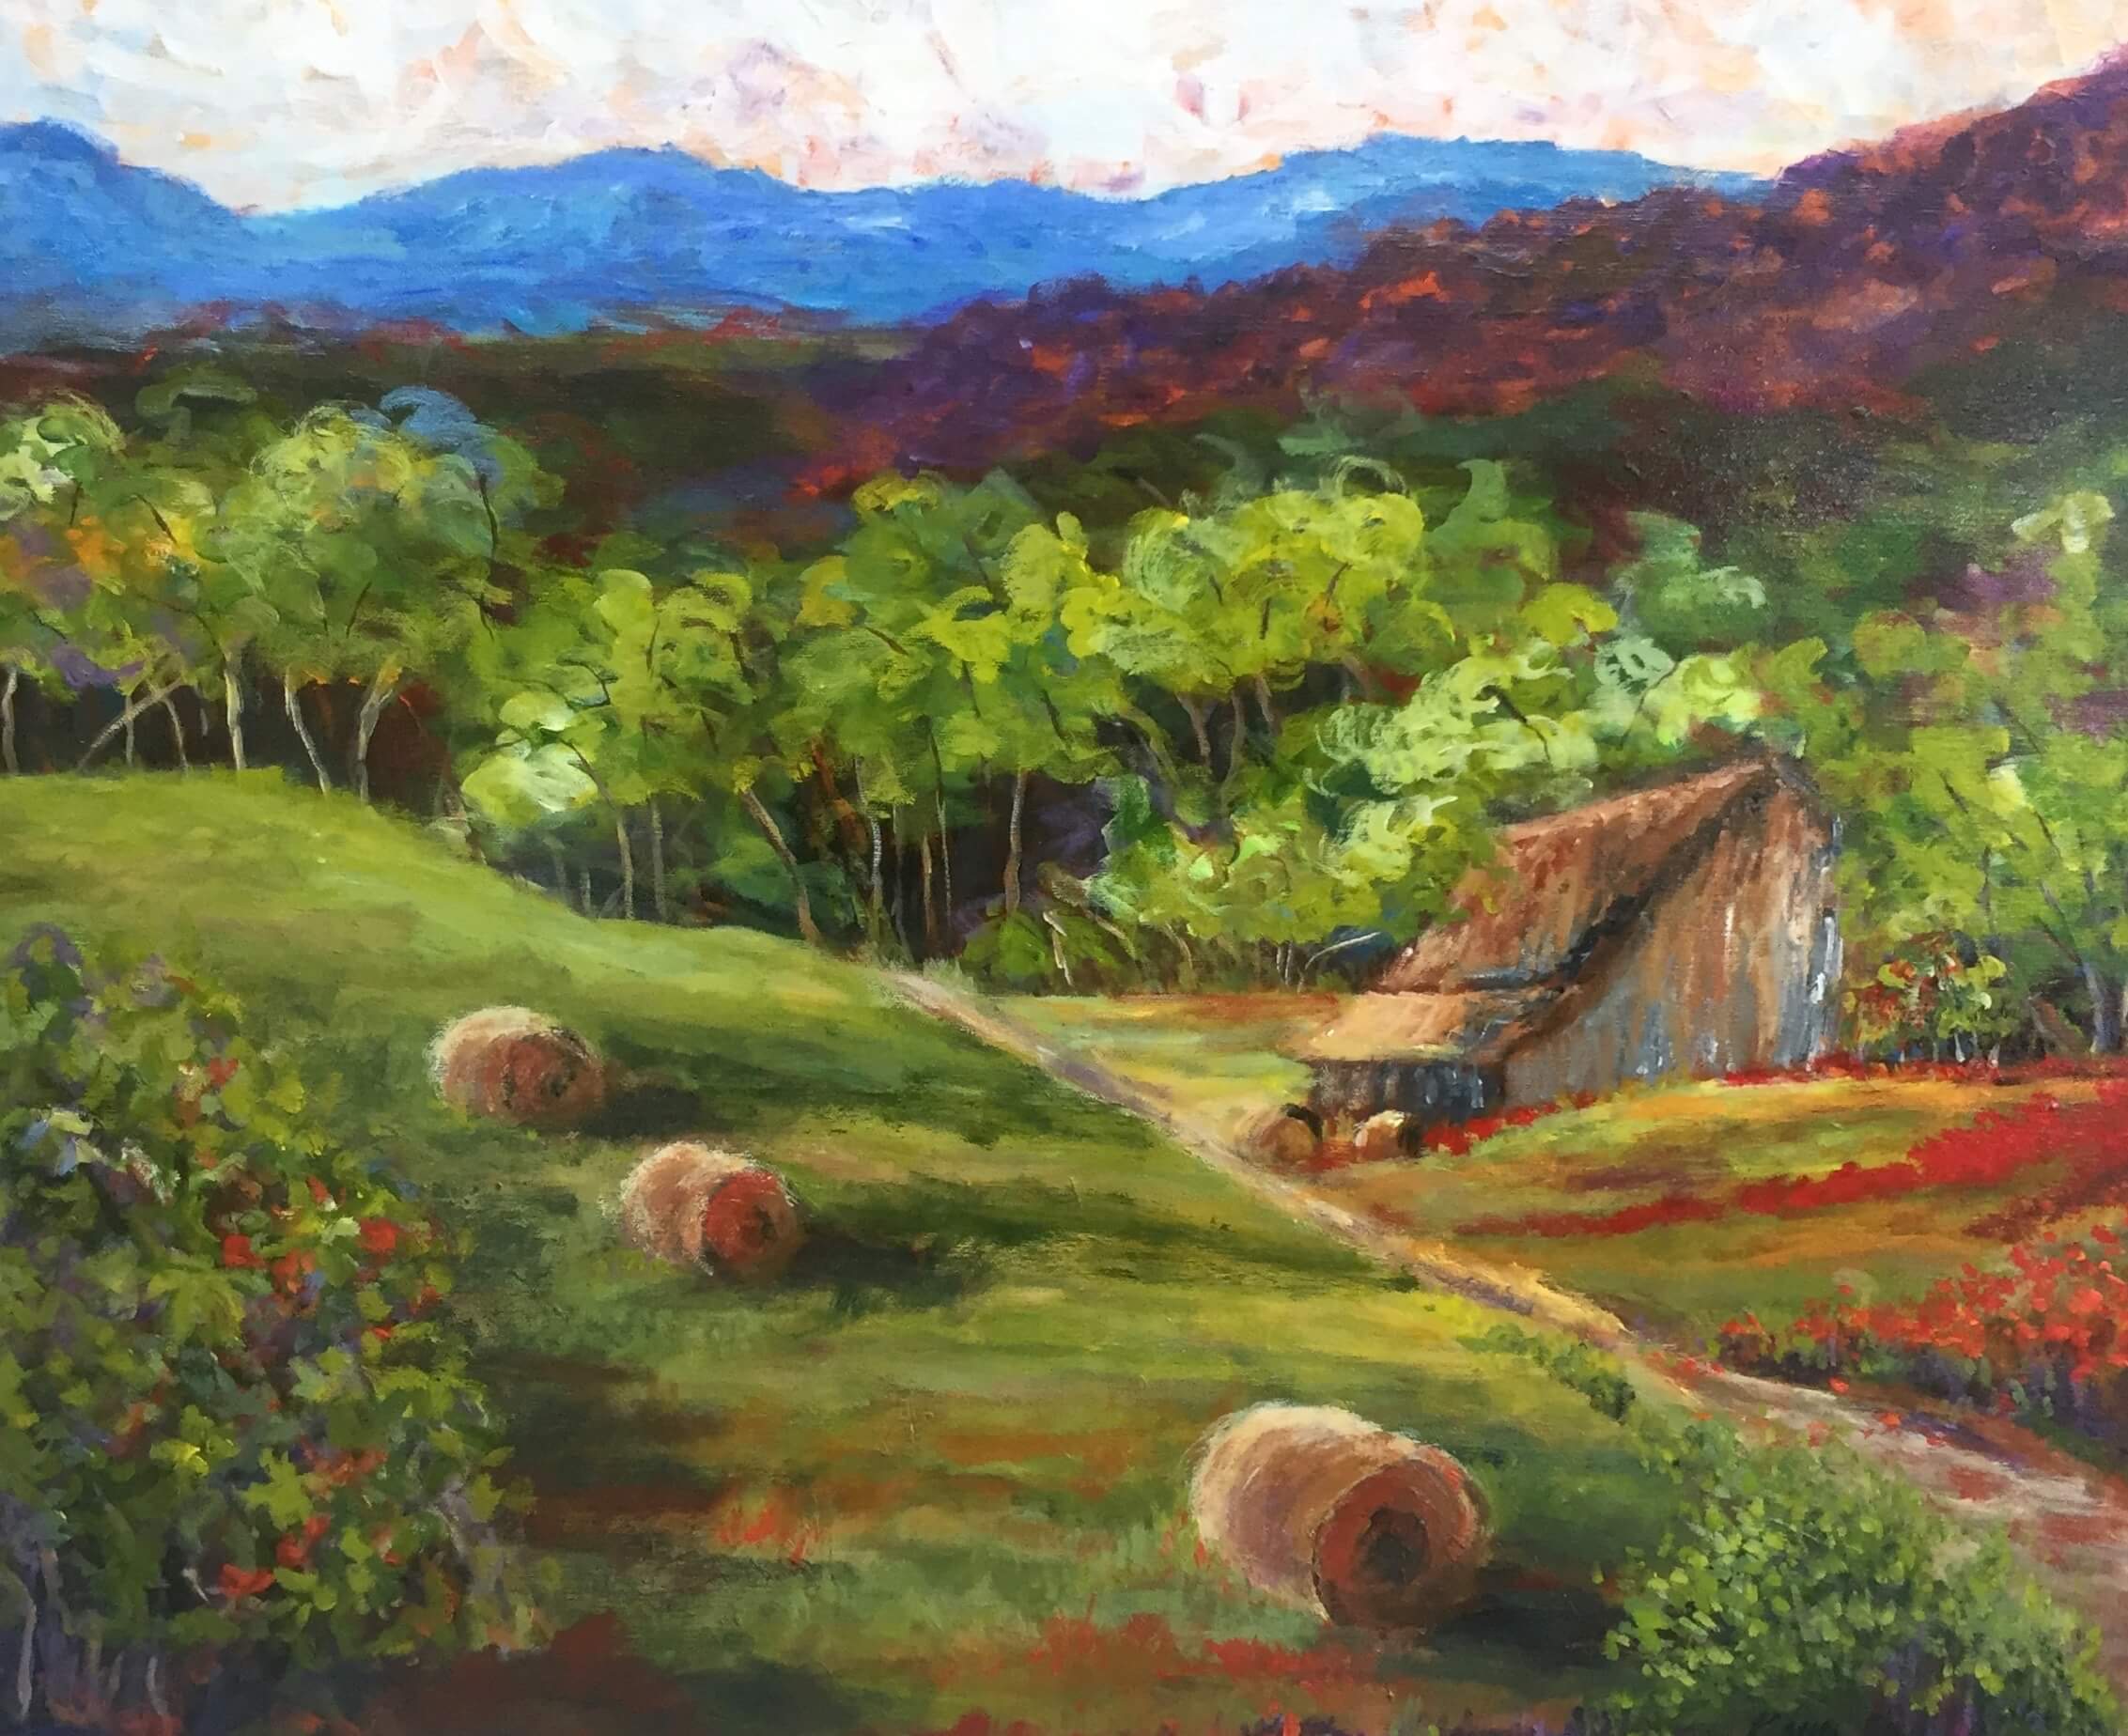 A Mountain Barn 24" x 30" Acrylic on Canvas Original Painting by Kathy Miller